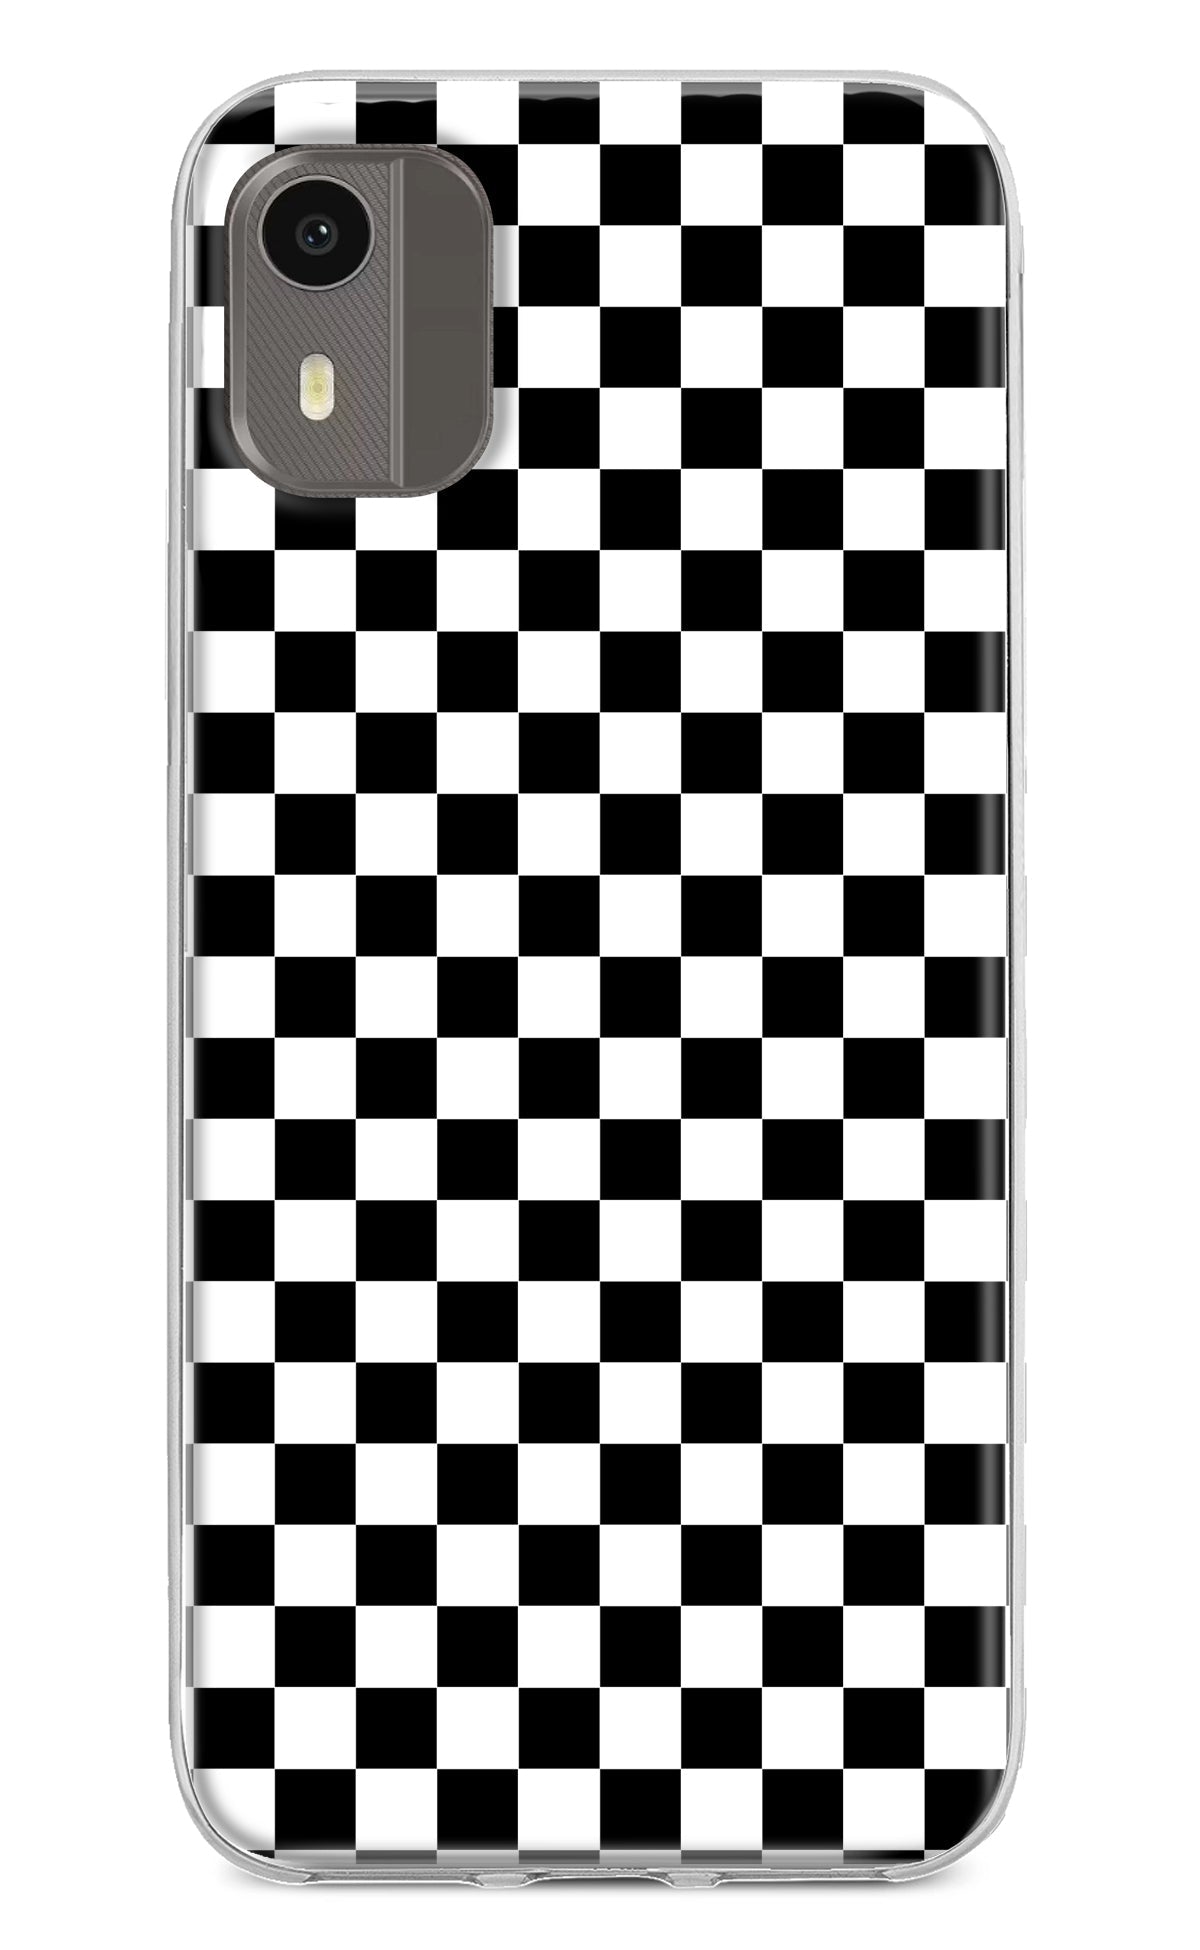 Chess Board Nokia C12/C12 Pro Back Cover